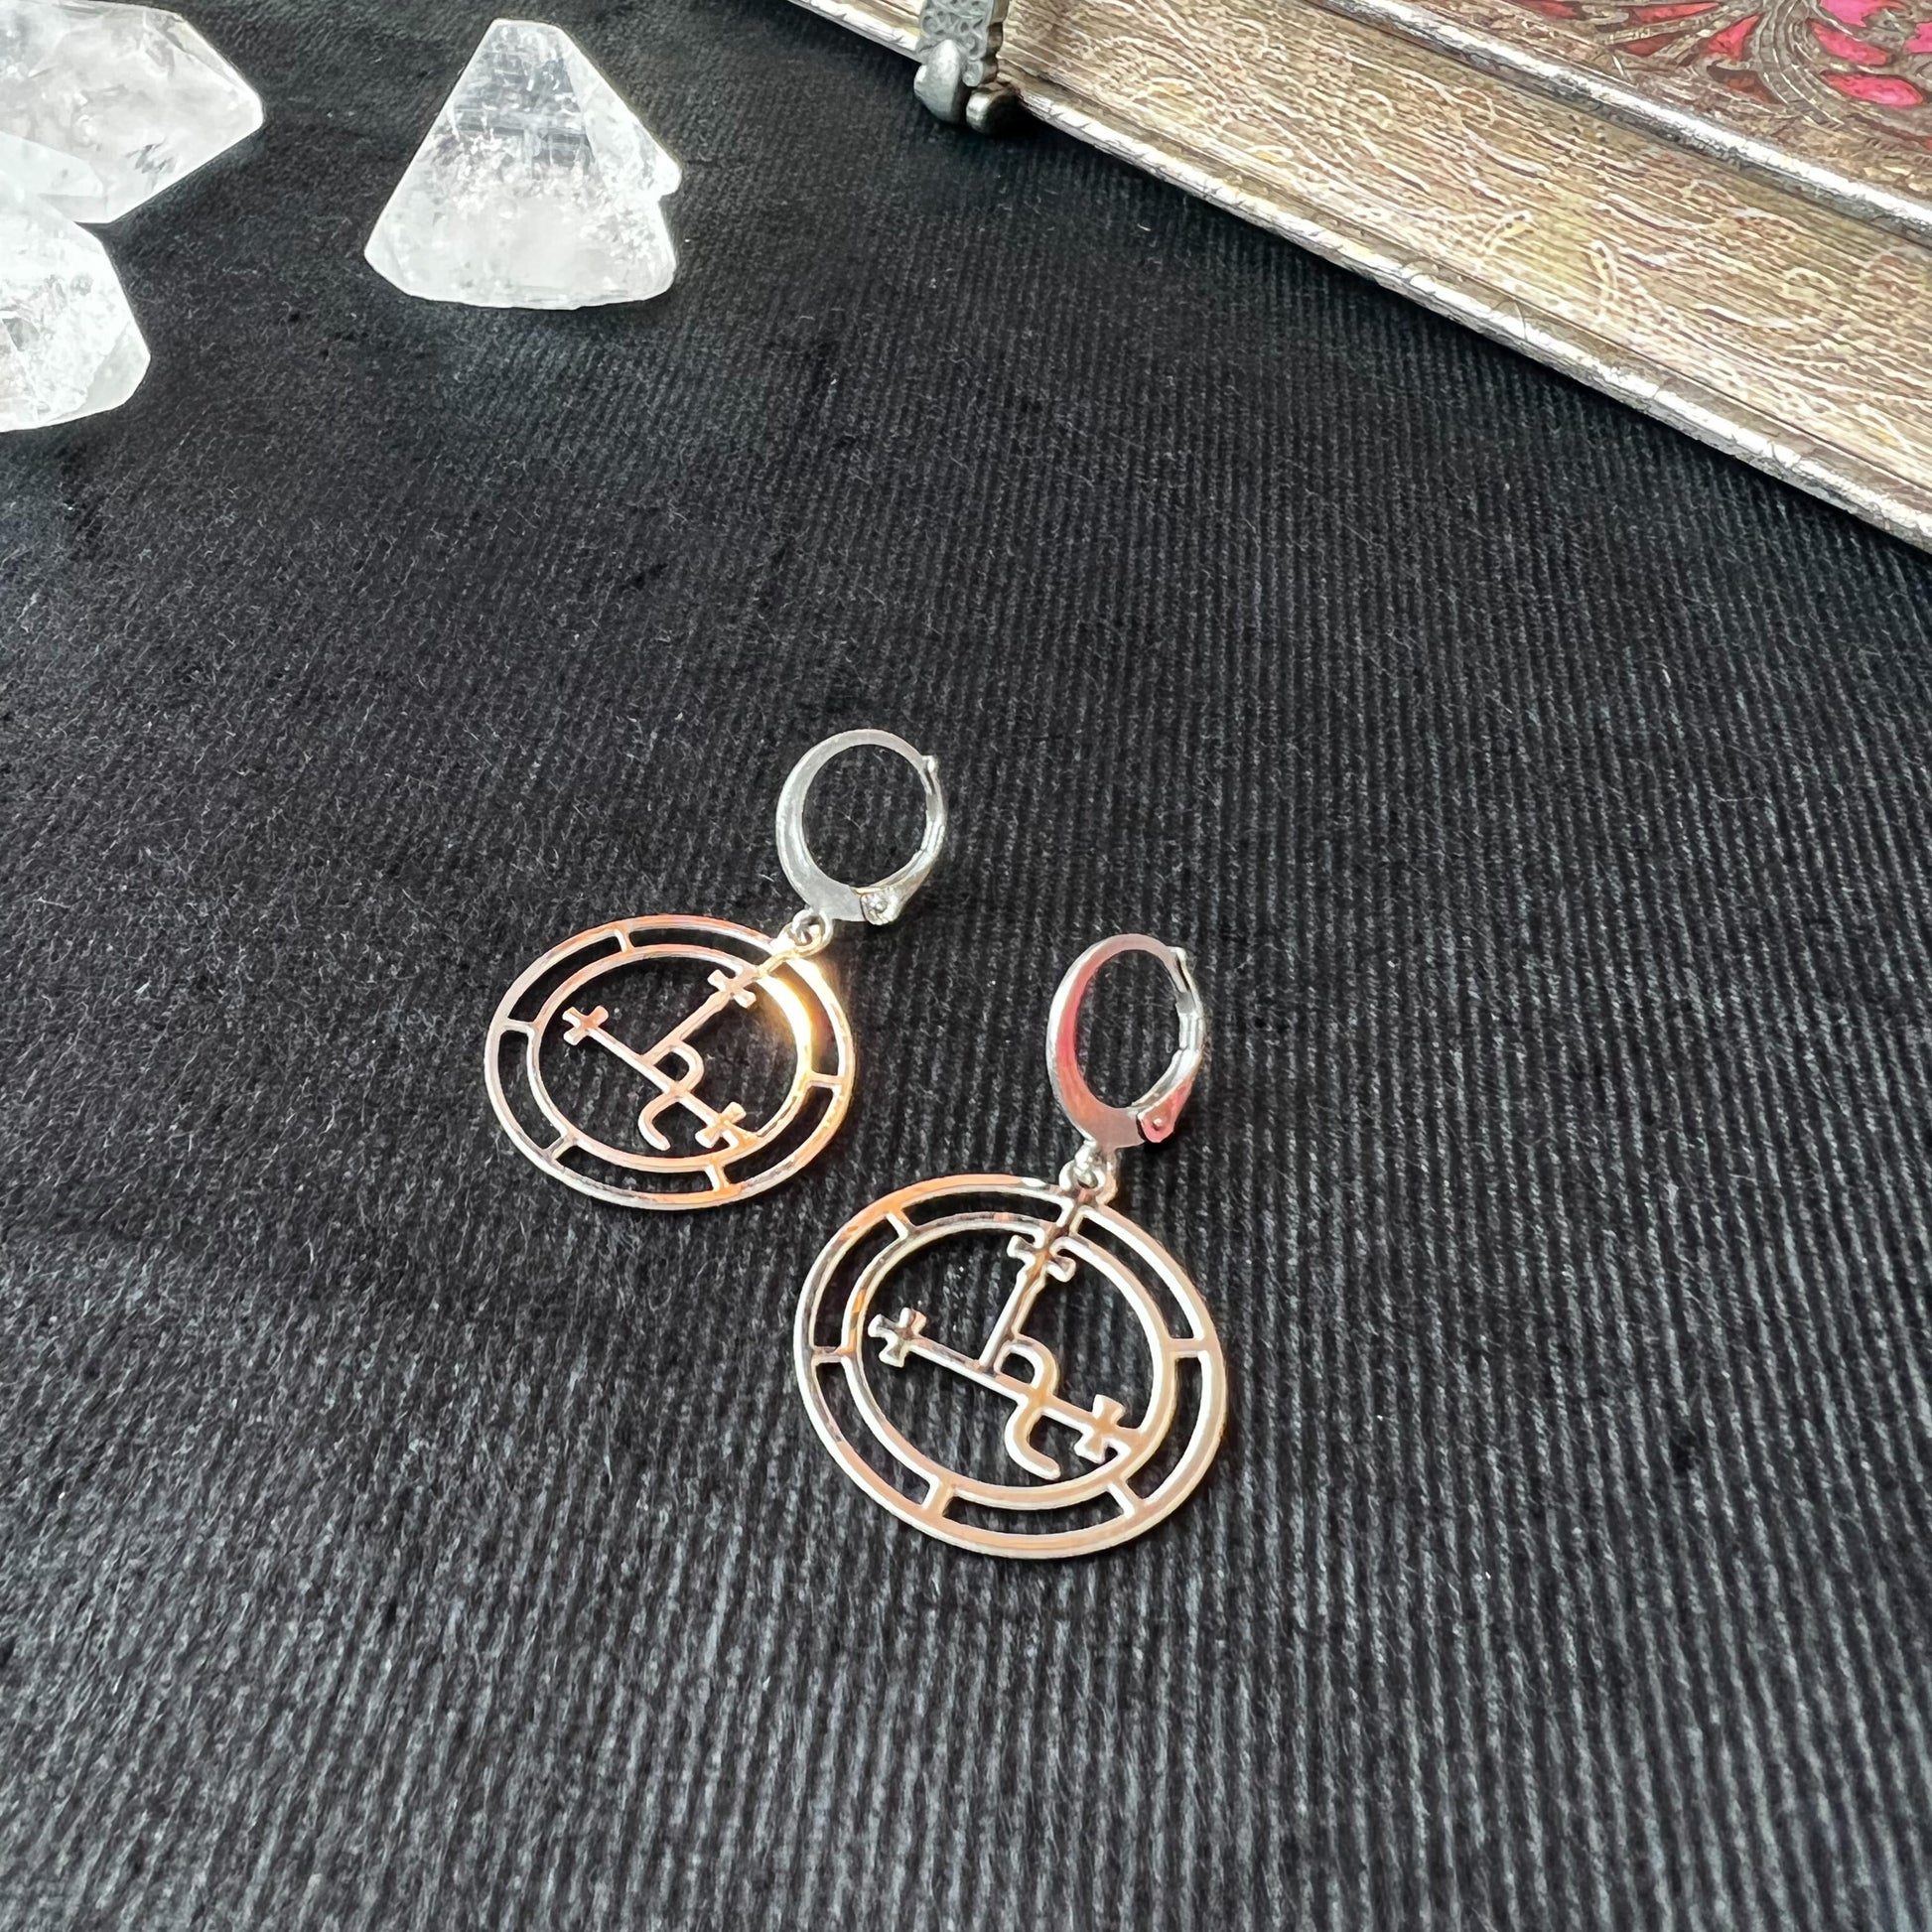 Lilith sigil earrings made of stainless steel - The French Witch shop